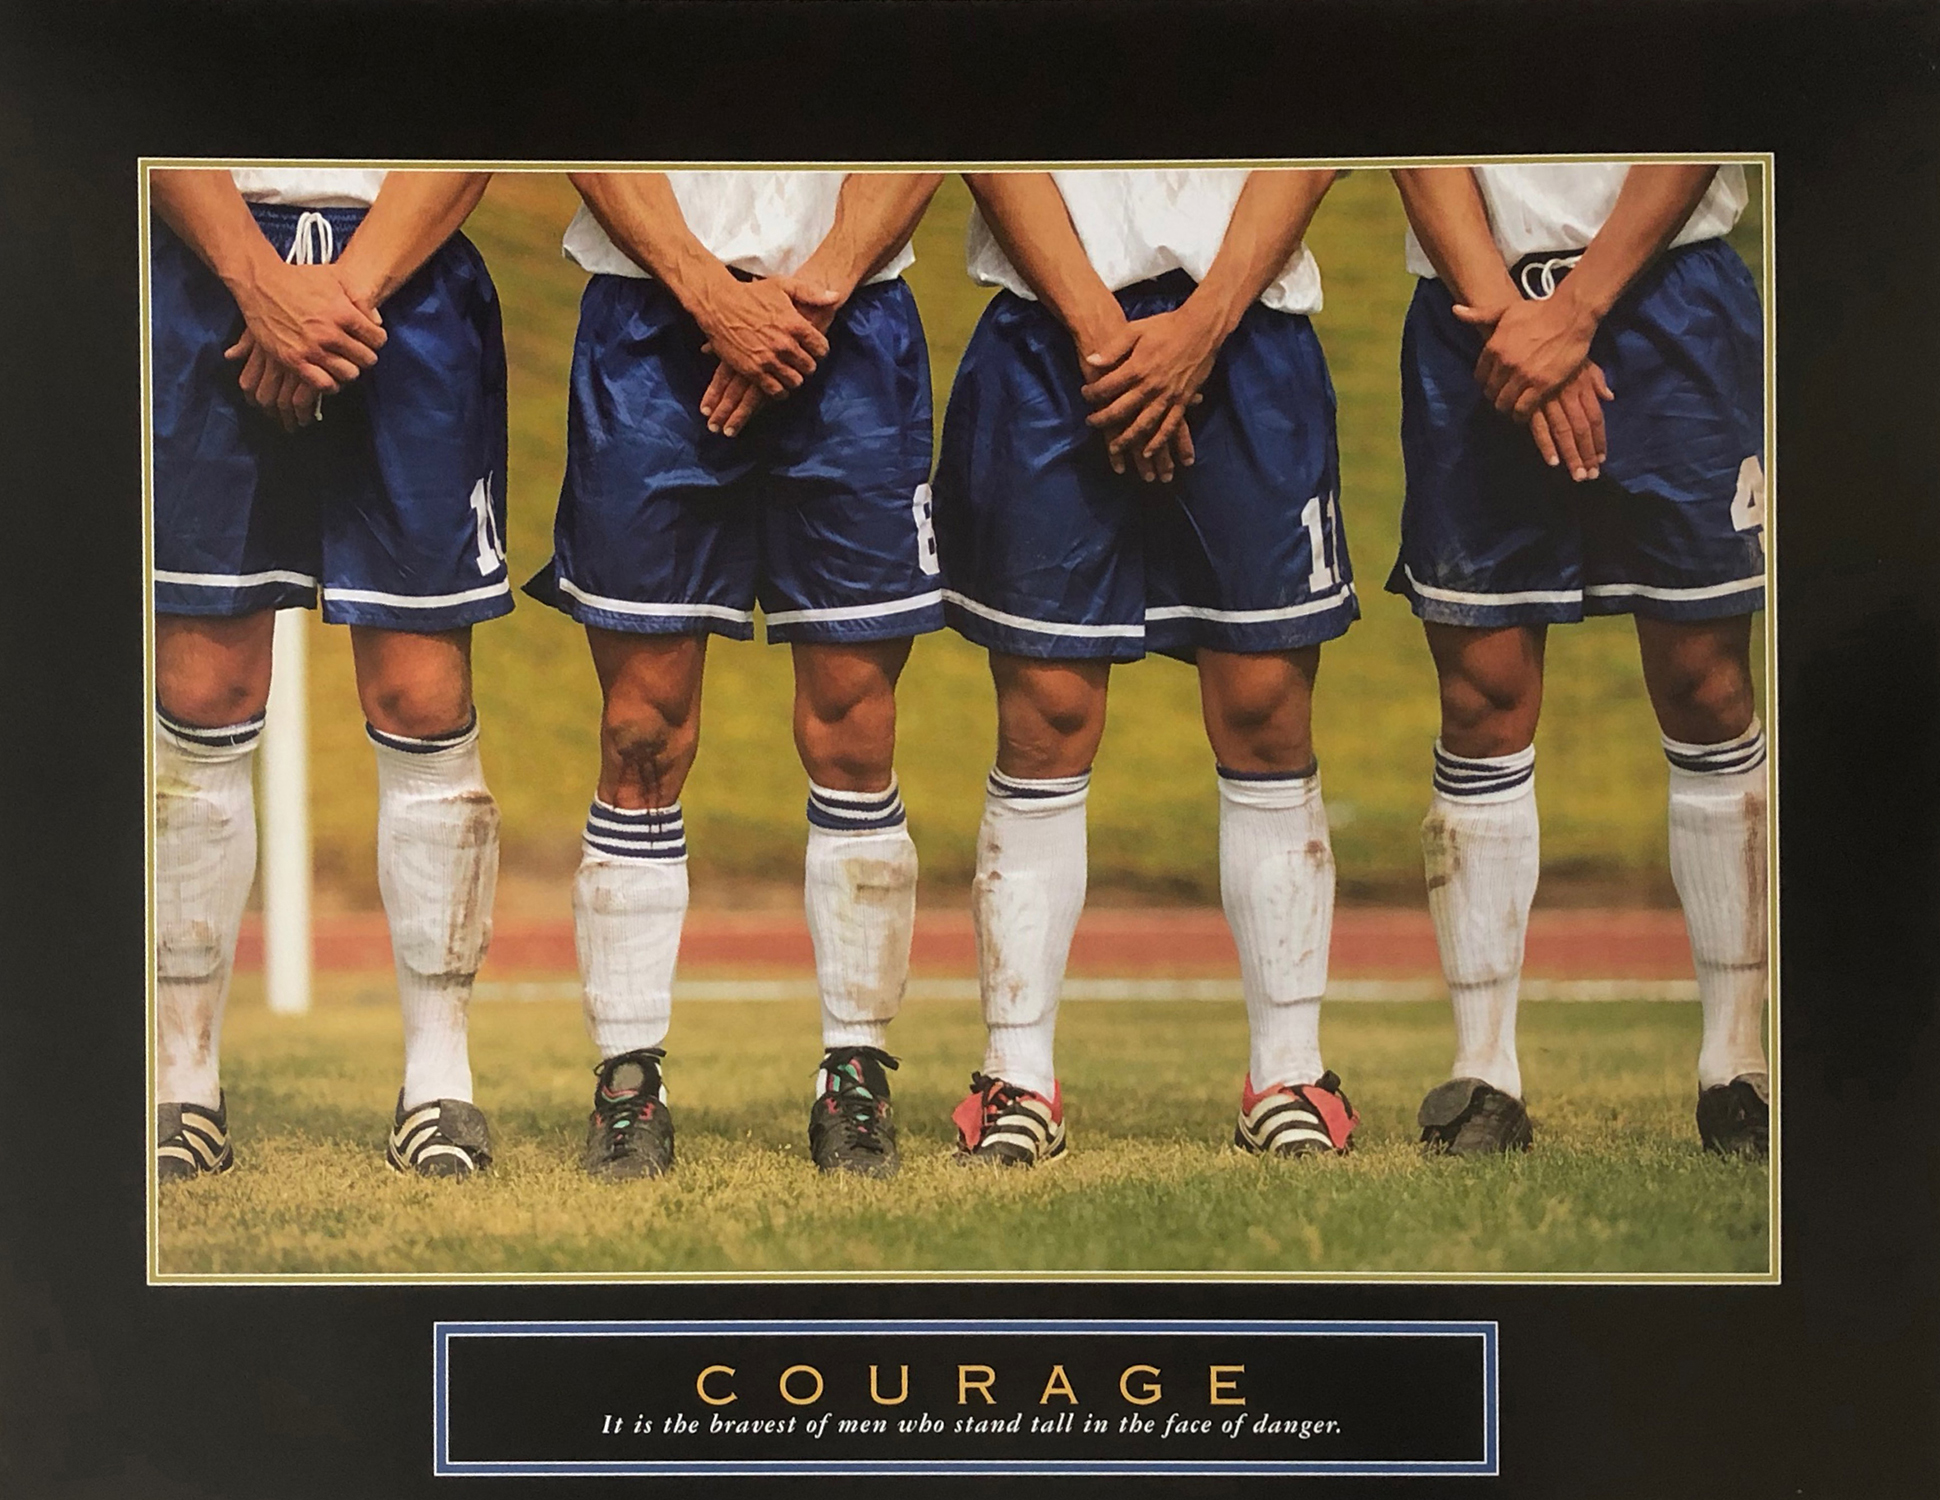 Courage - Soccer Players